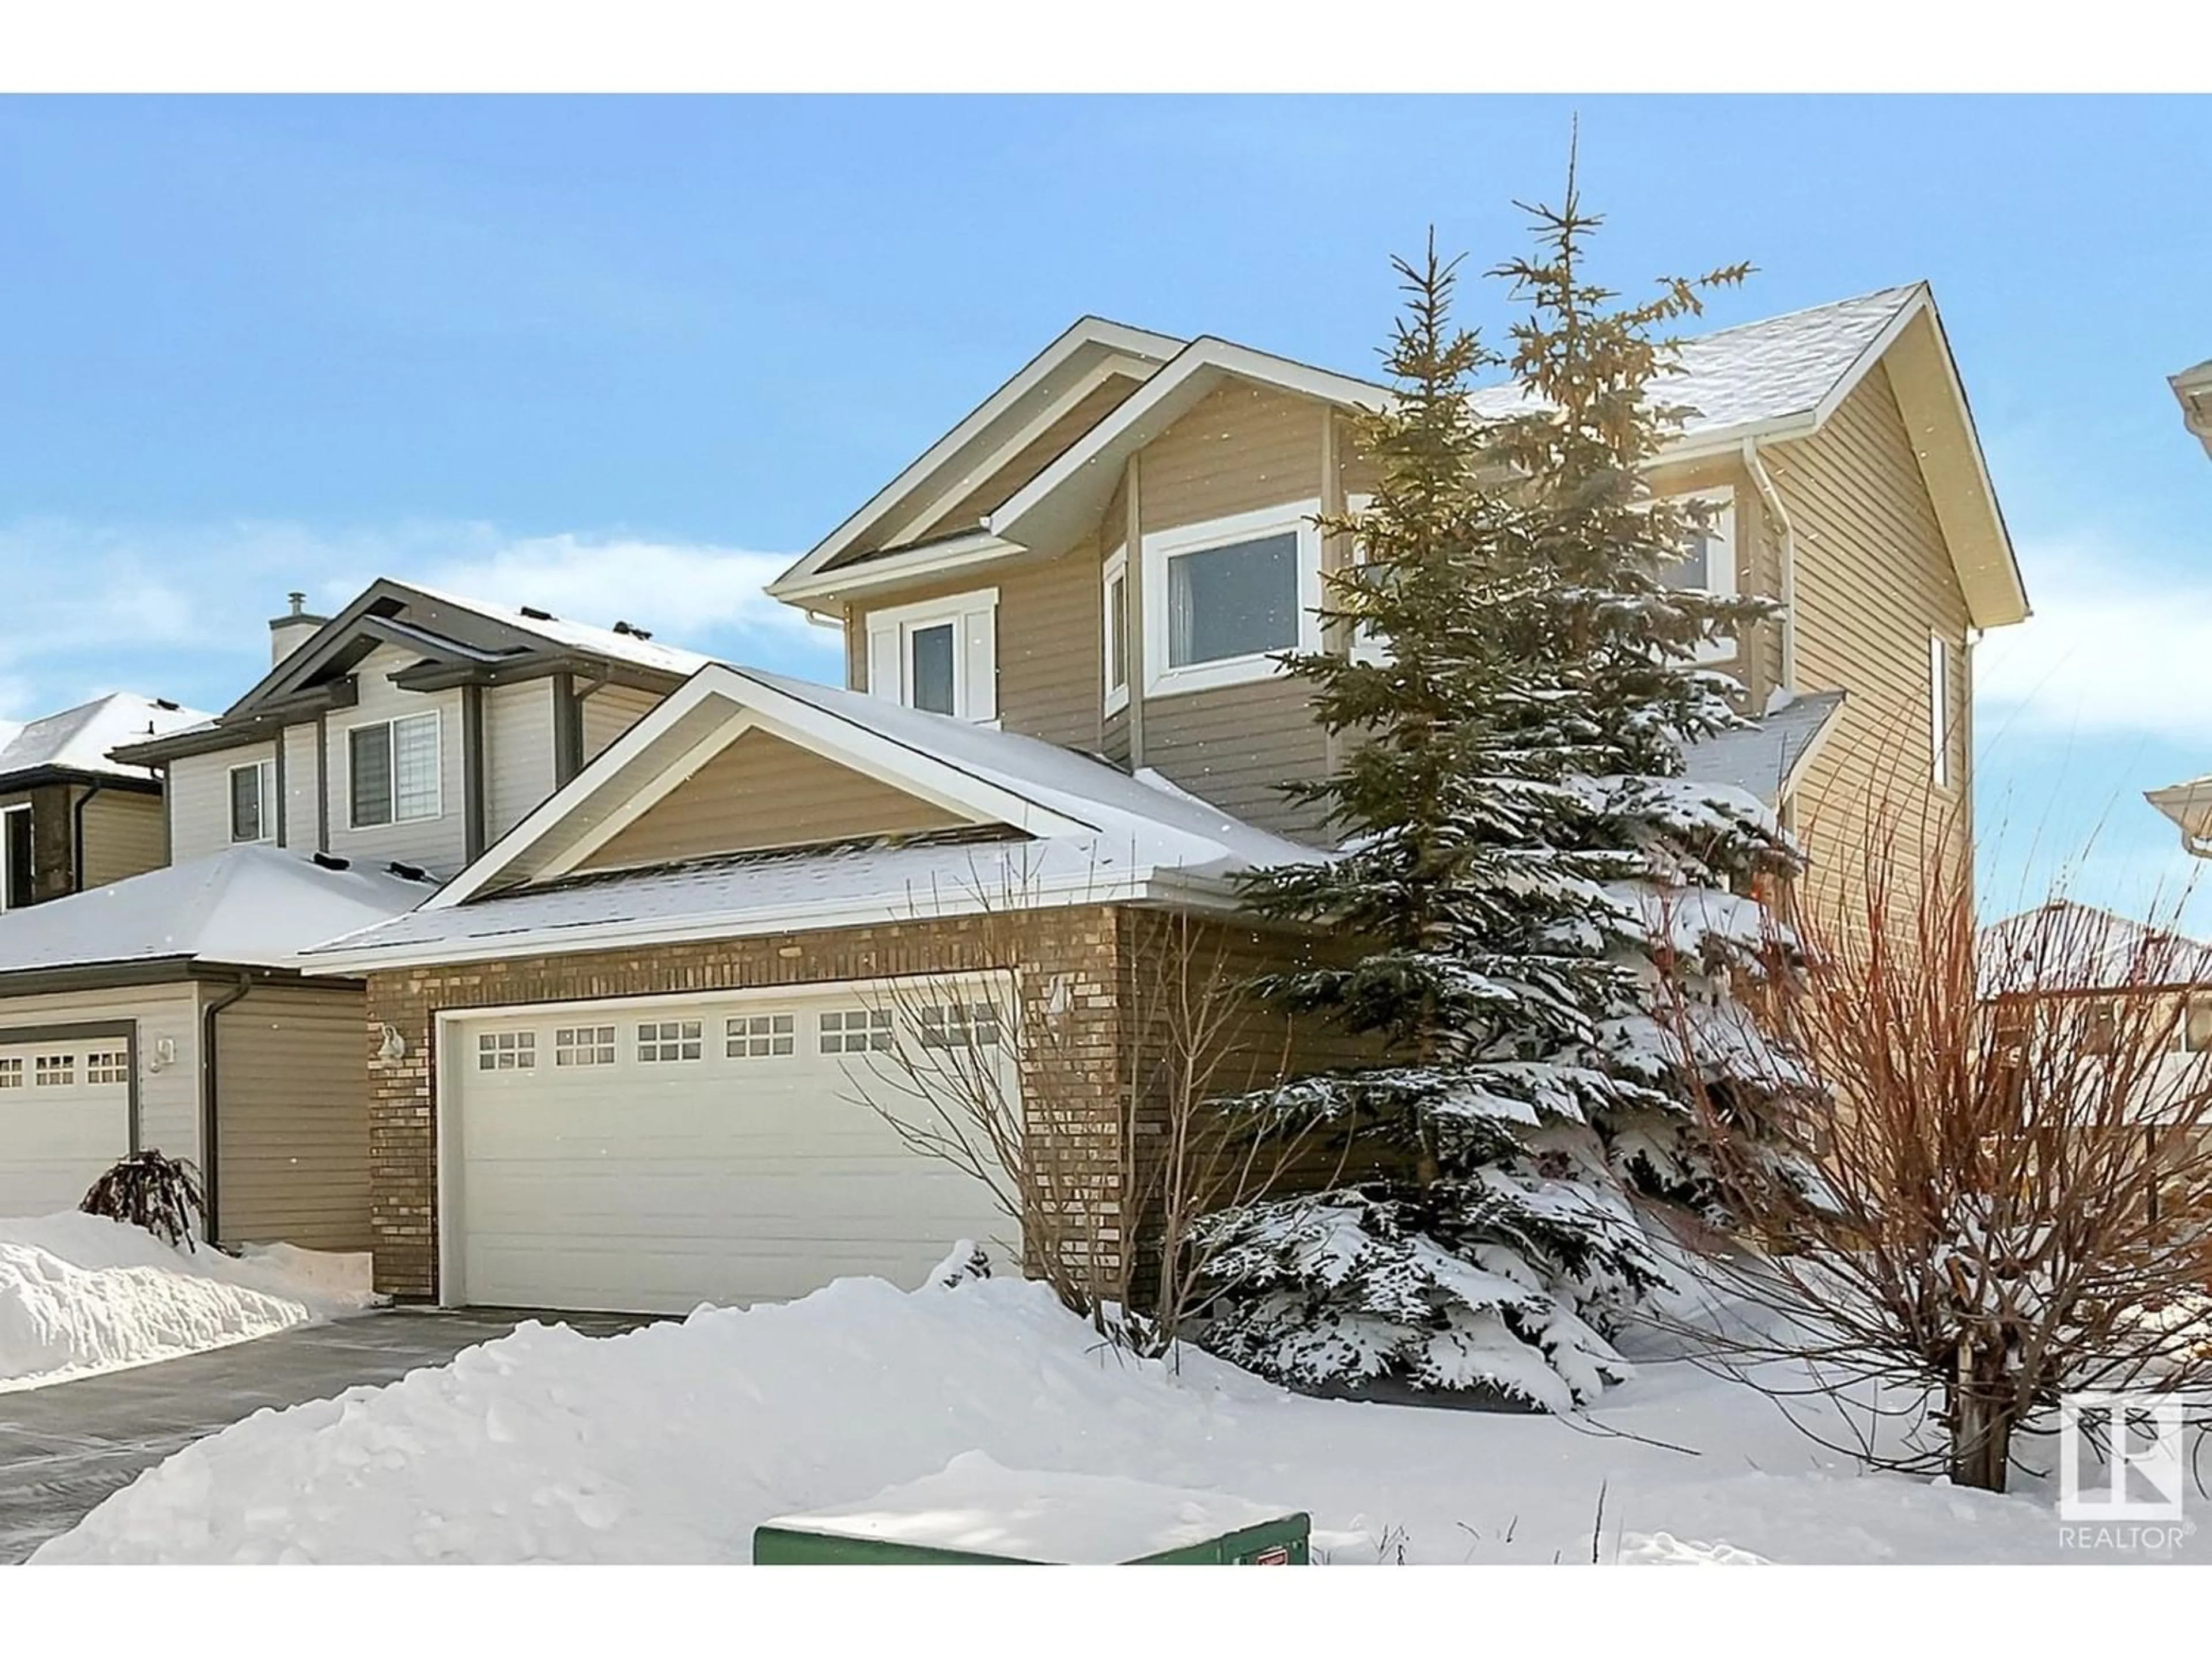 A pic from exterior of the house or condo for 11817 173A AV NW, Edmonton Alberta T6X6G2